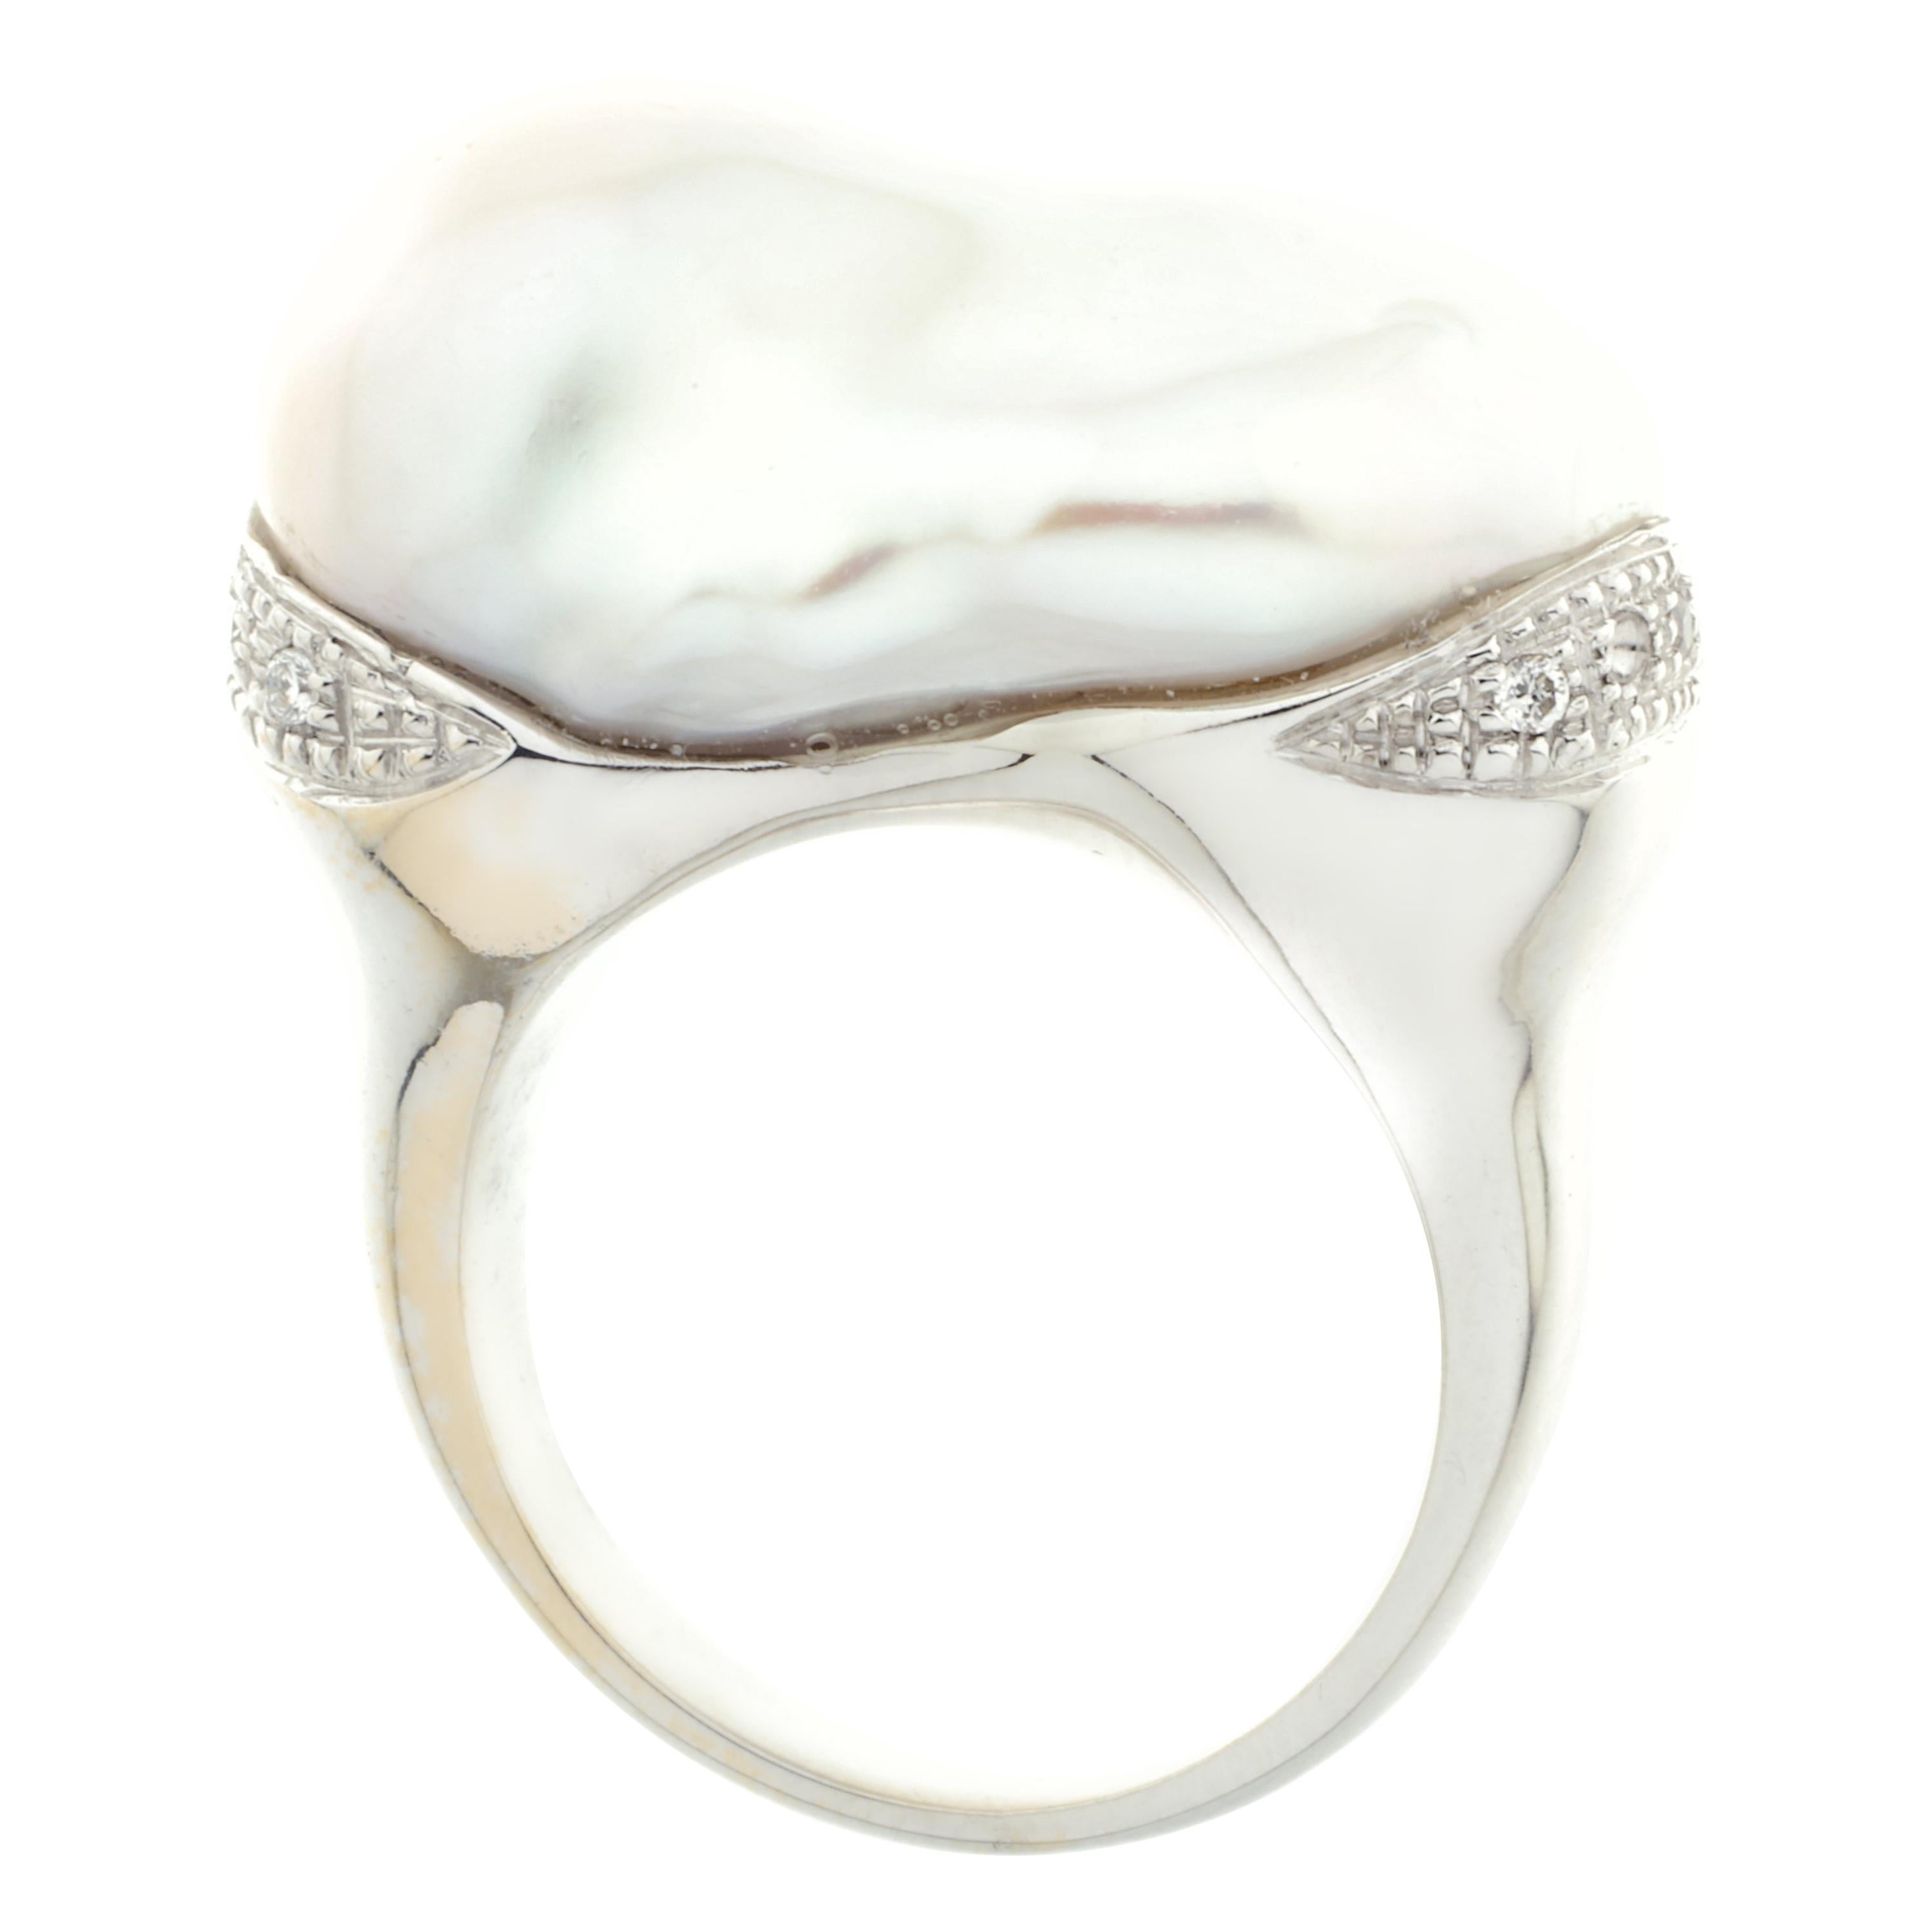 A stunning cocktail ring masterfully created entirely by hand from 18-karat white gold. Featuring a large cultured pearl set with ten white diamonds rated G VS which 